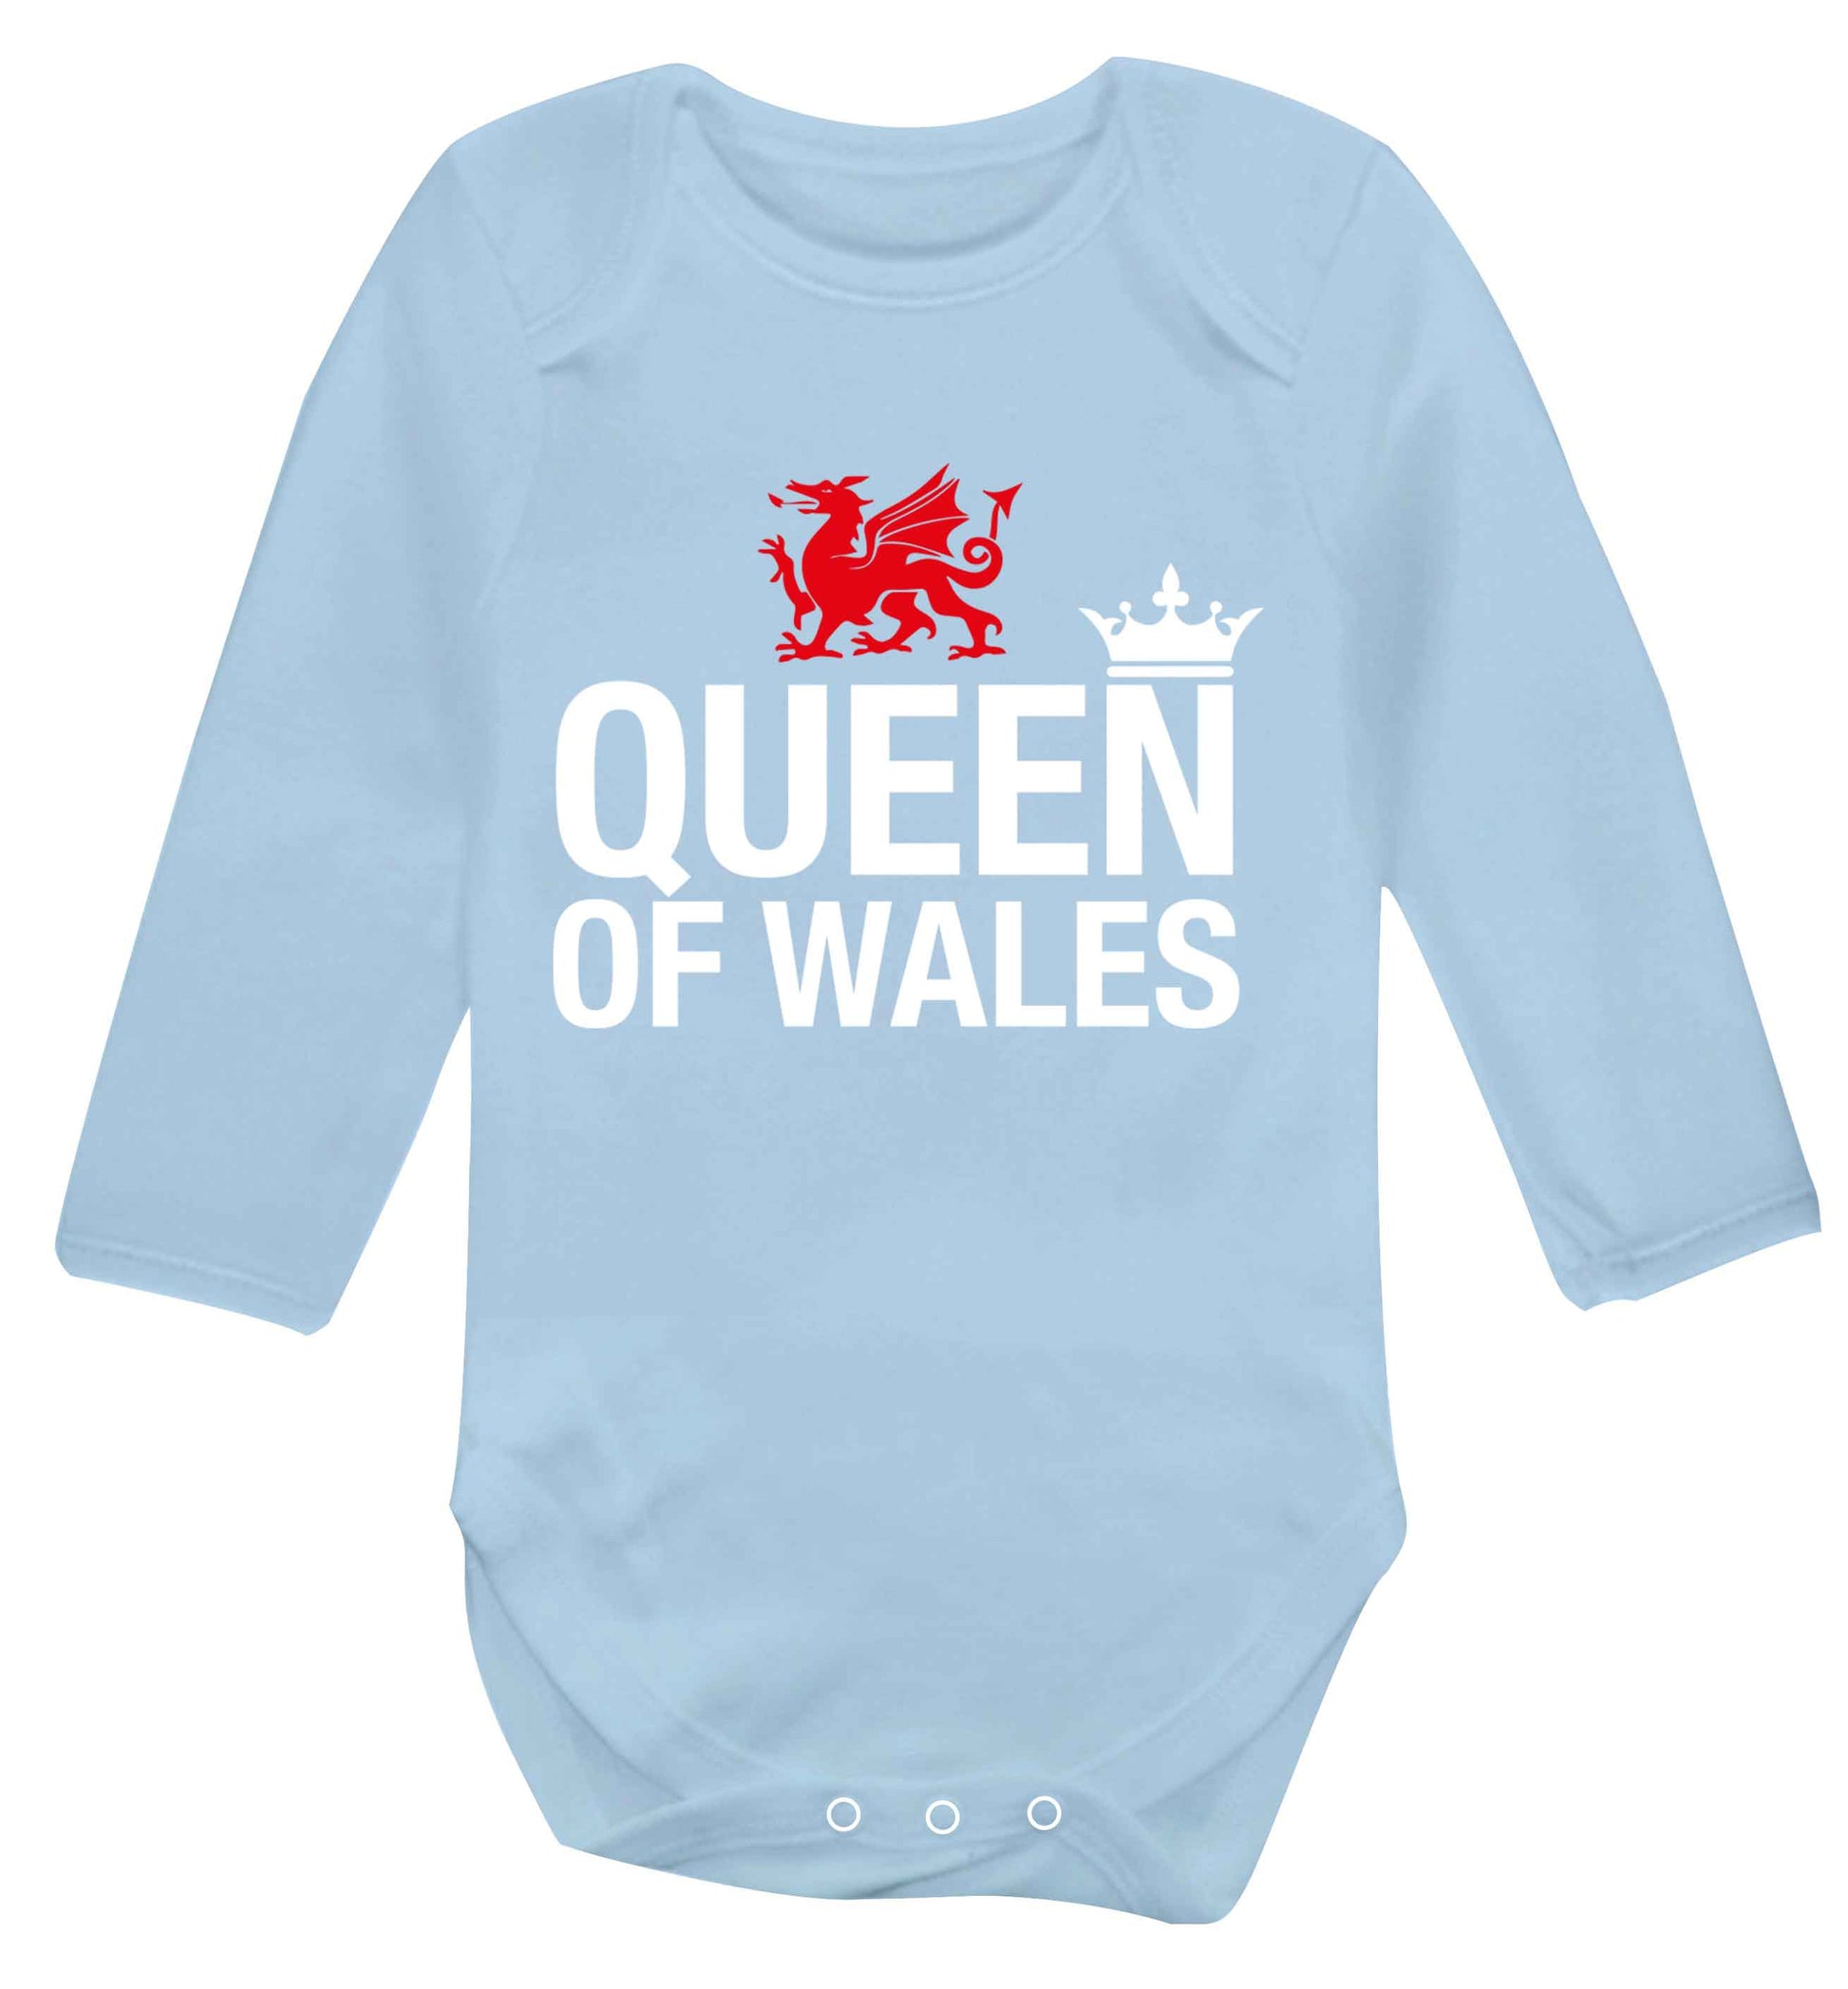 Queen of Wales Baby Vest long sleeved pale blue 6-12 months